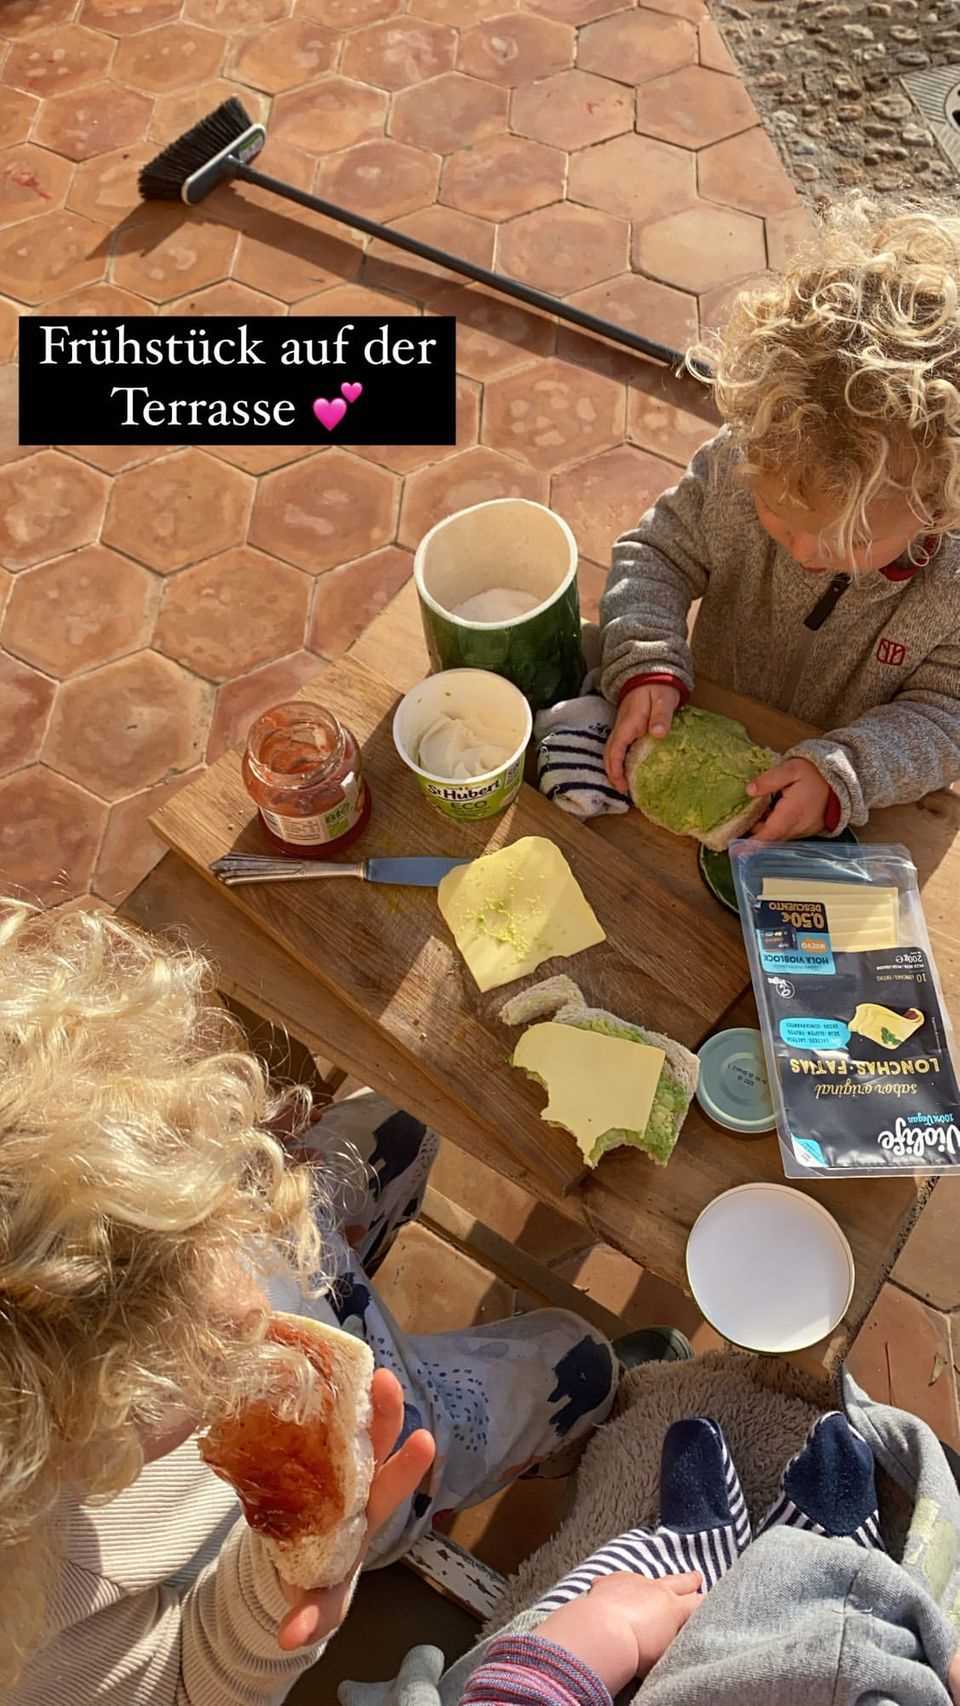 In her Instagram story, Janni Kusmagk shows what her new everyday family life looks like on Mallorca.